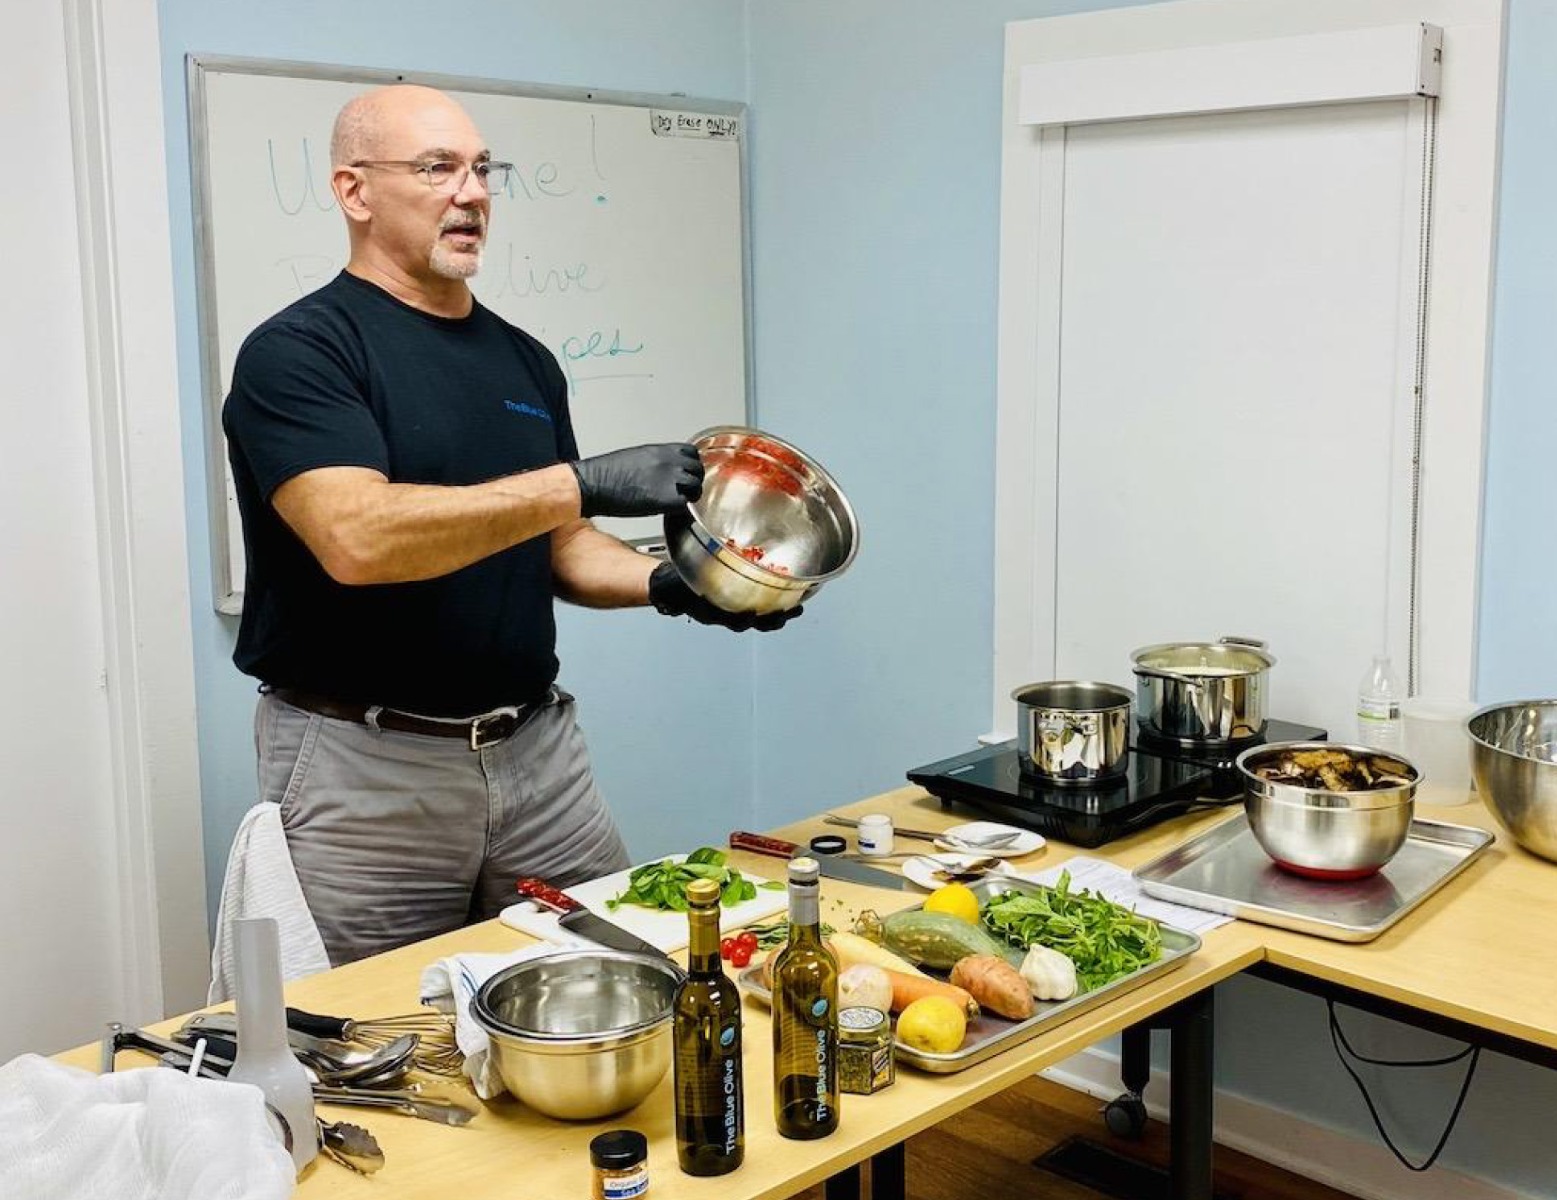 john cooking at the autumn recipes event at the pawling library